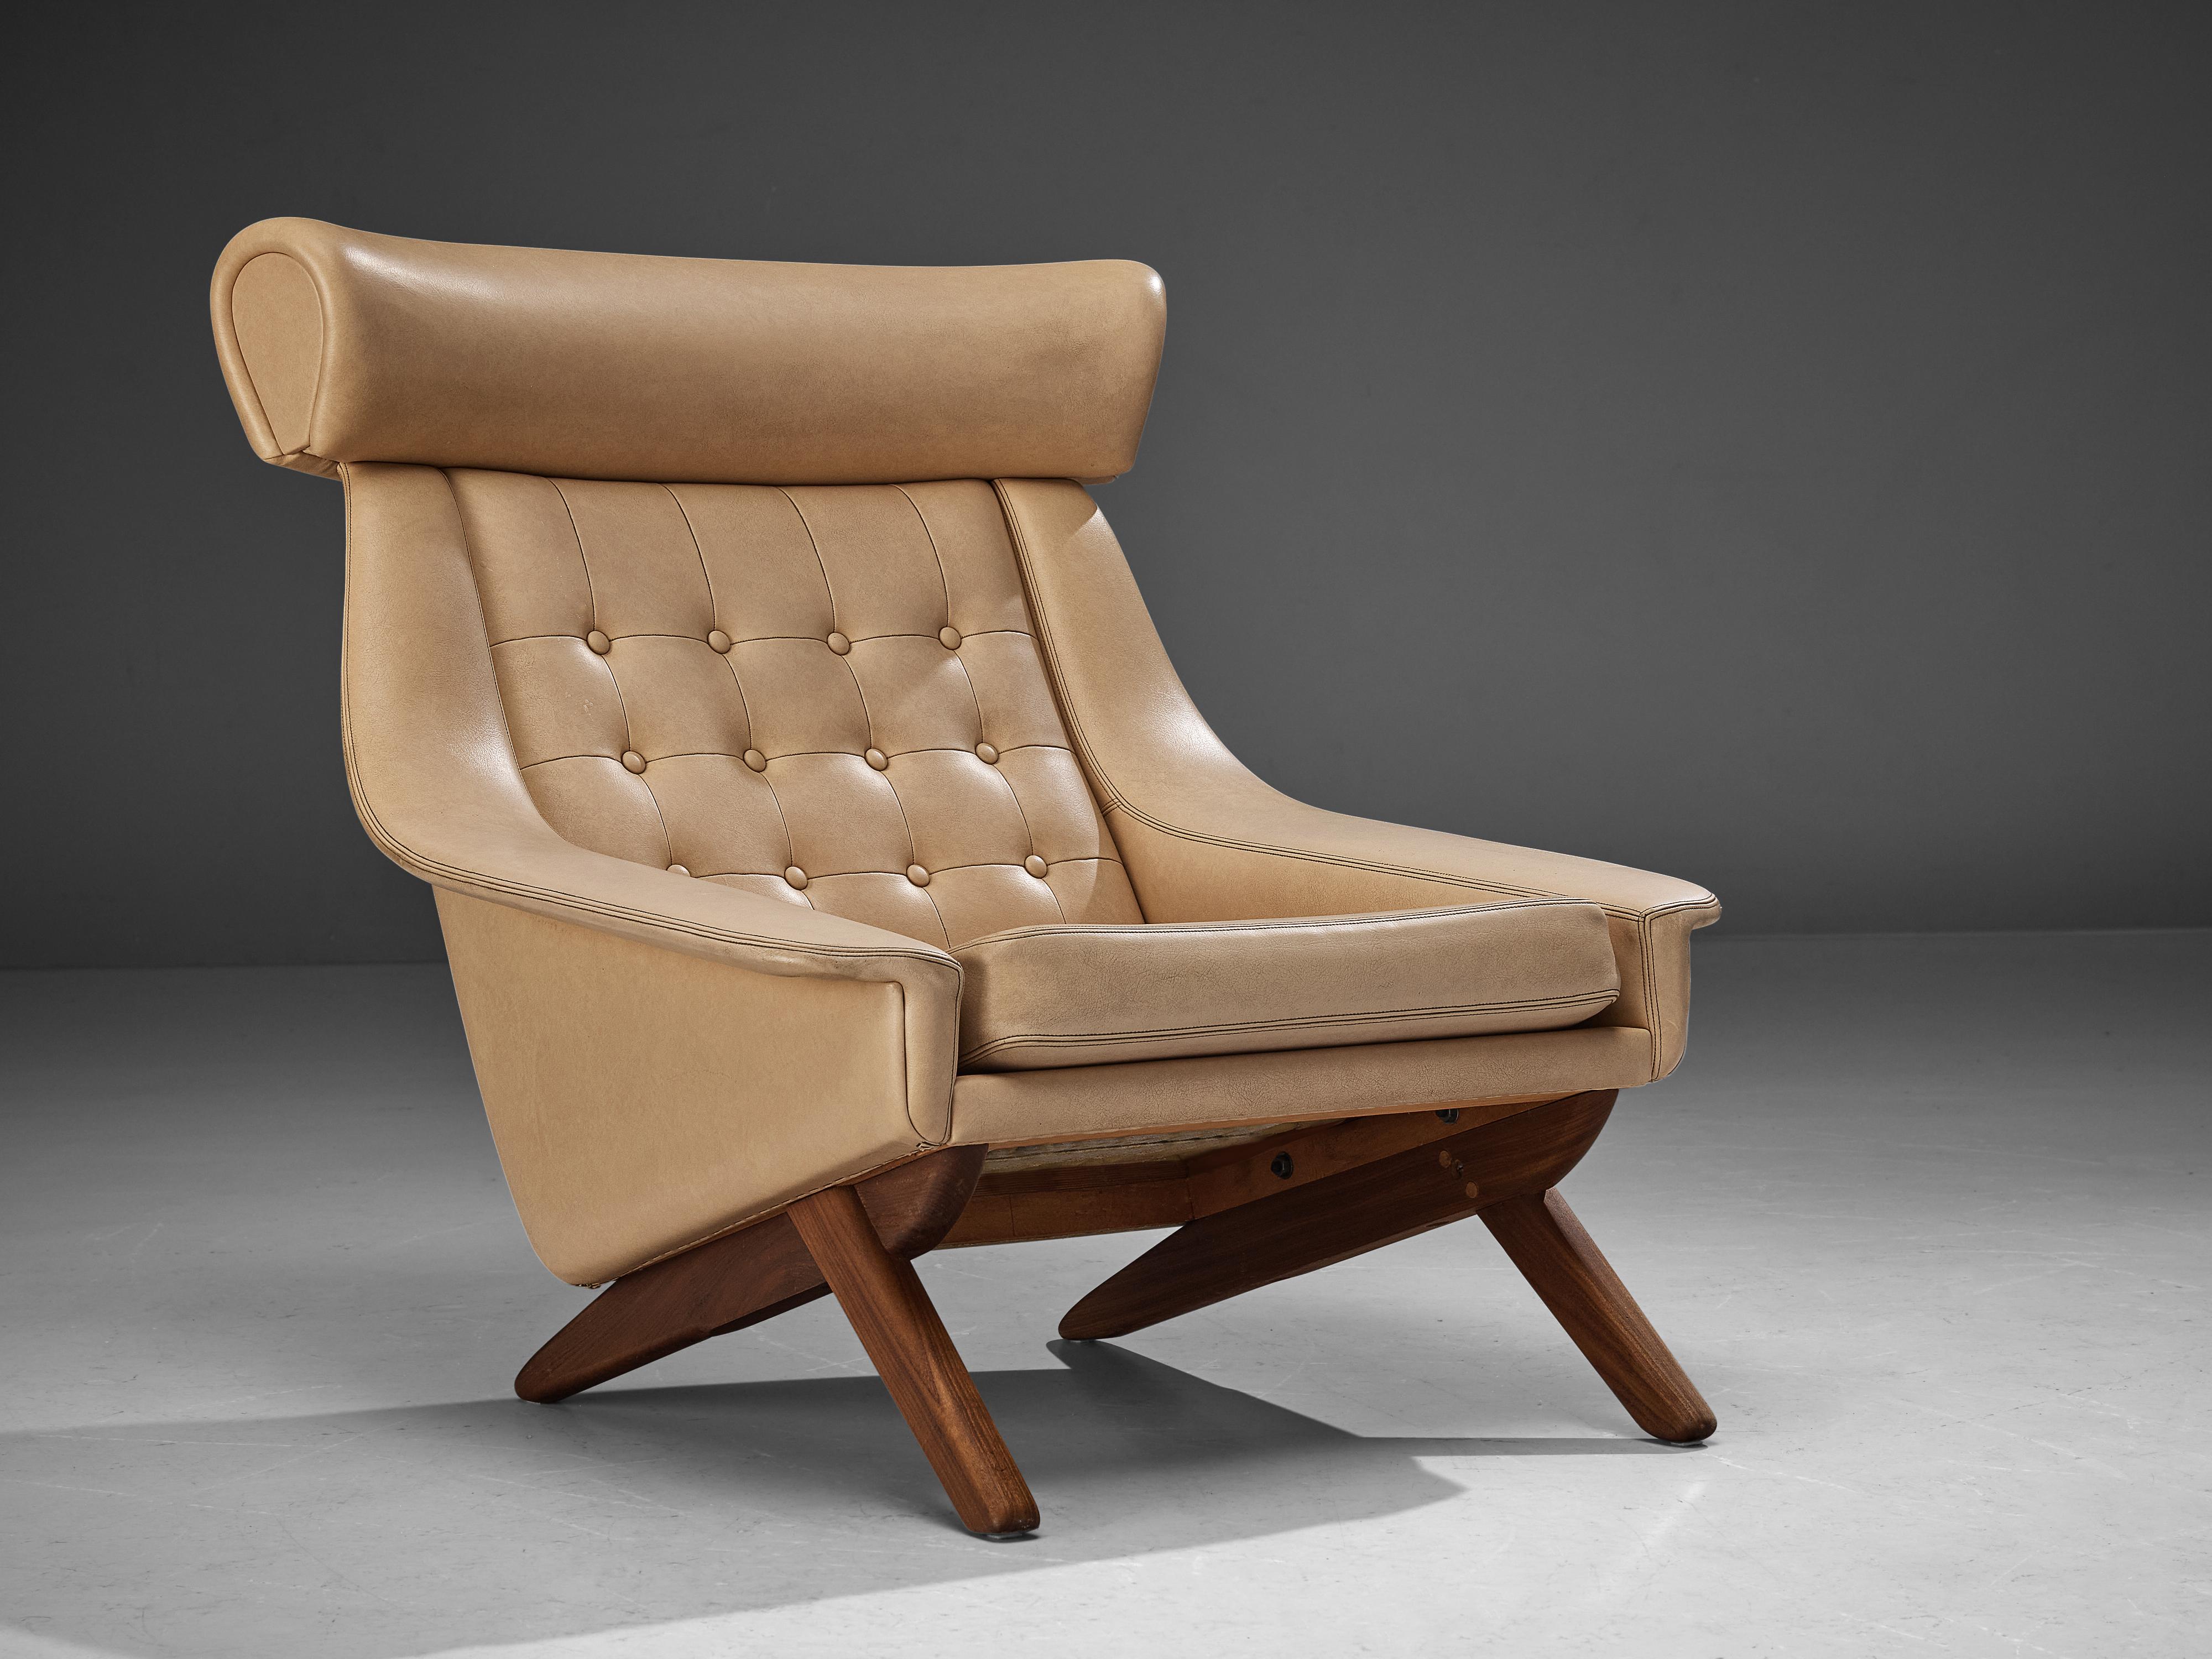 Illum Wikkelsø, lounge chair, leatherette, teak, Denmark 1960s

Well designed easy chair in beige leatherette upholstery by Danish designer Illum Wikkelsø. This 'Ox Chair' shows some interesting details. Like the wide and large headrest at the top